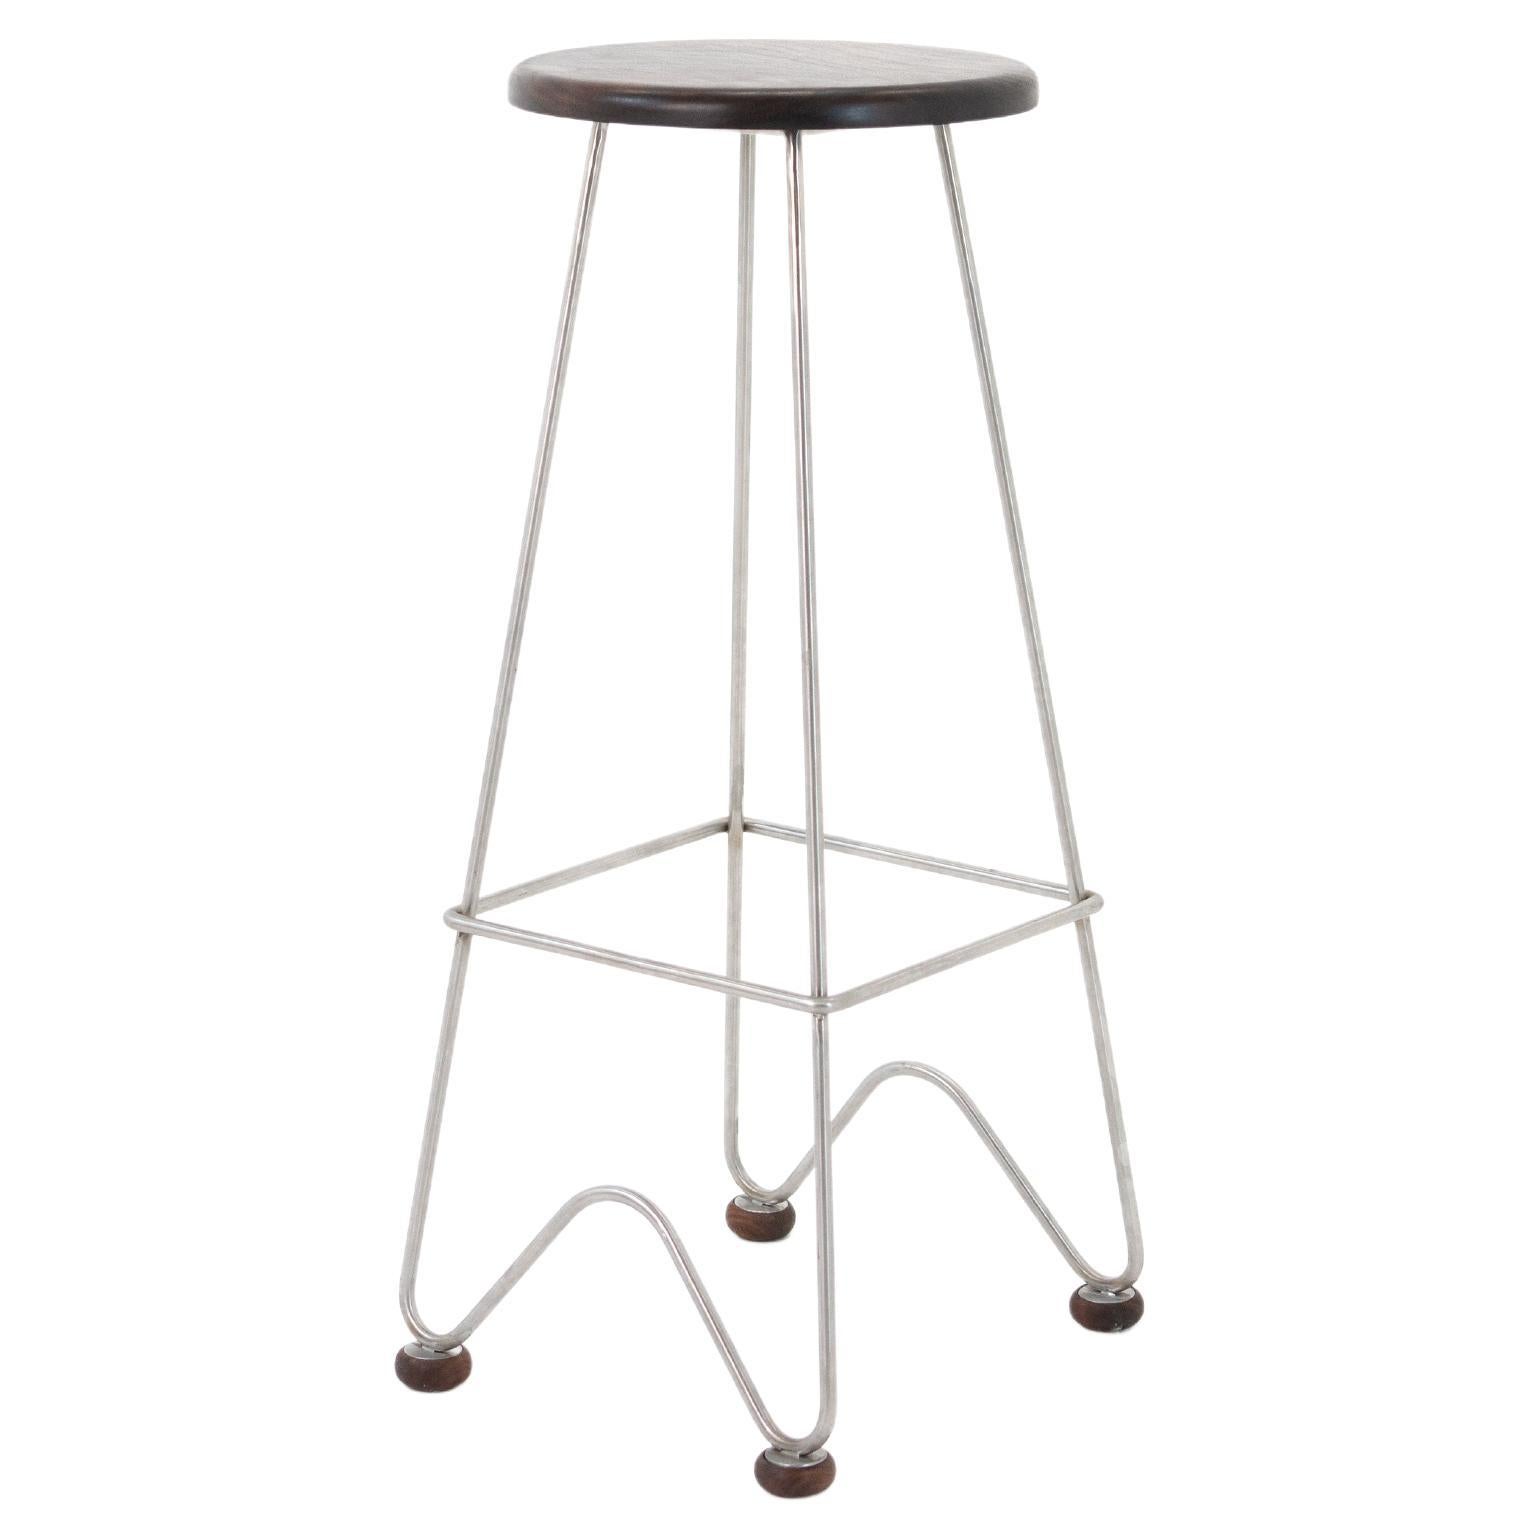 Fish Stool Features a Hand Bent Stainless Steel Frame and Solid Wood Seat